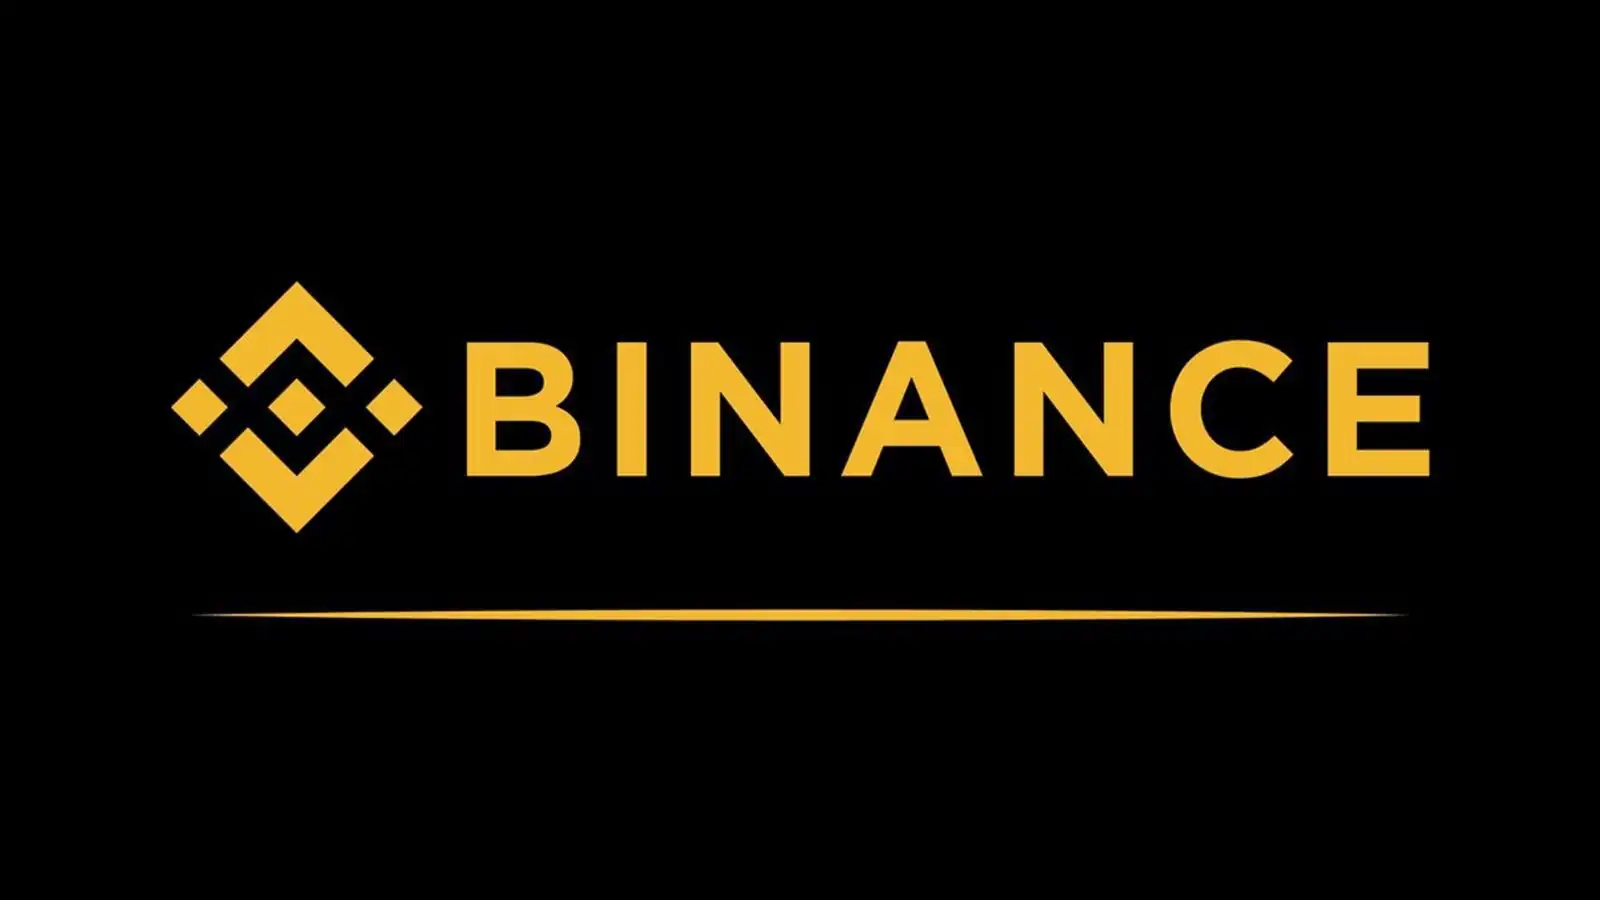 Binance Launches Temporary Fee Waiver Promotion for Margin Trading